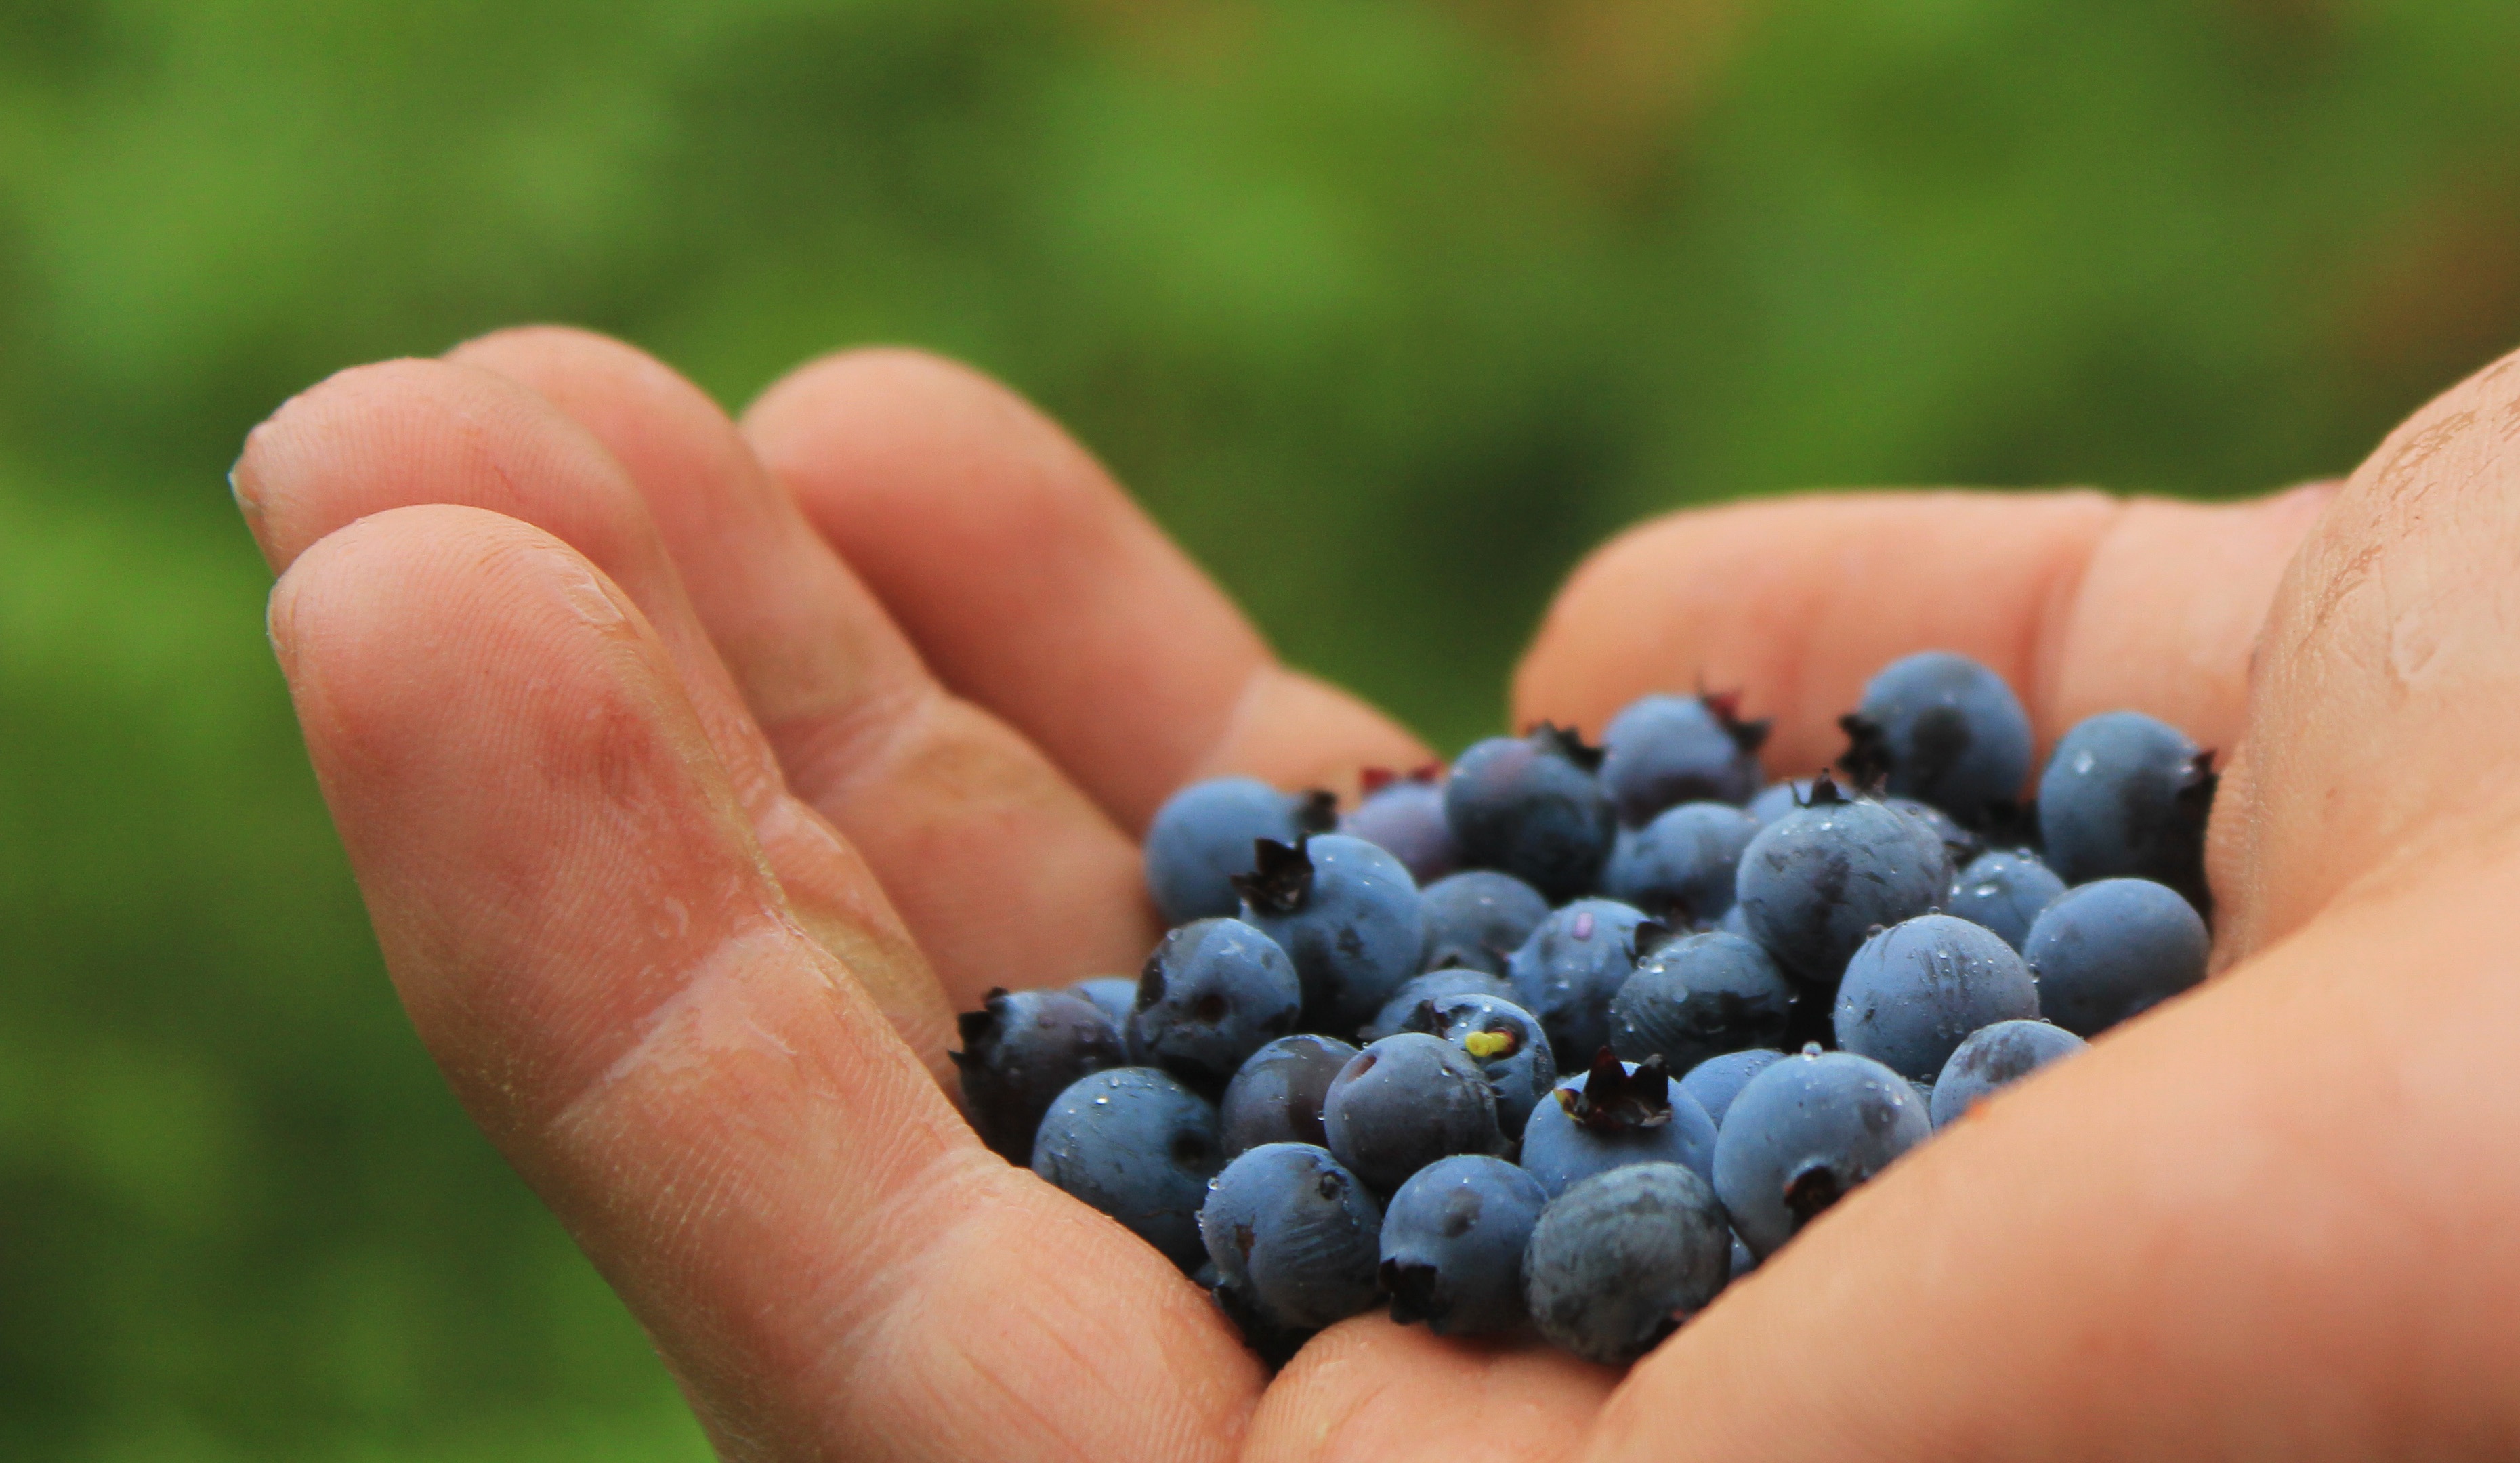 A whole armful of blueberries